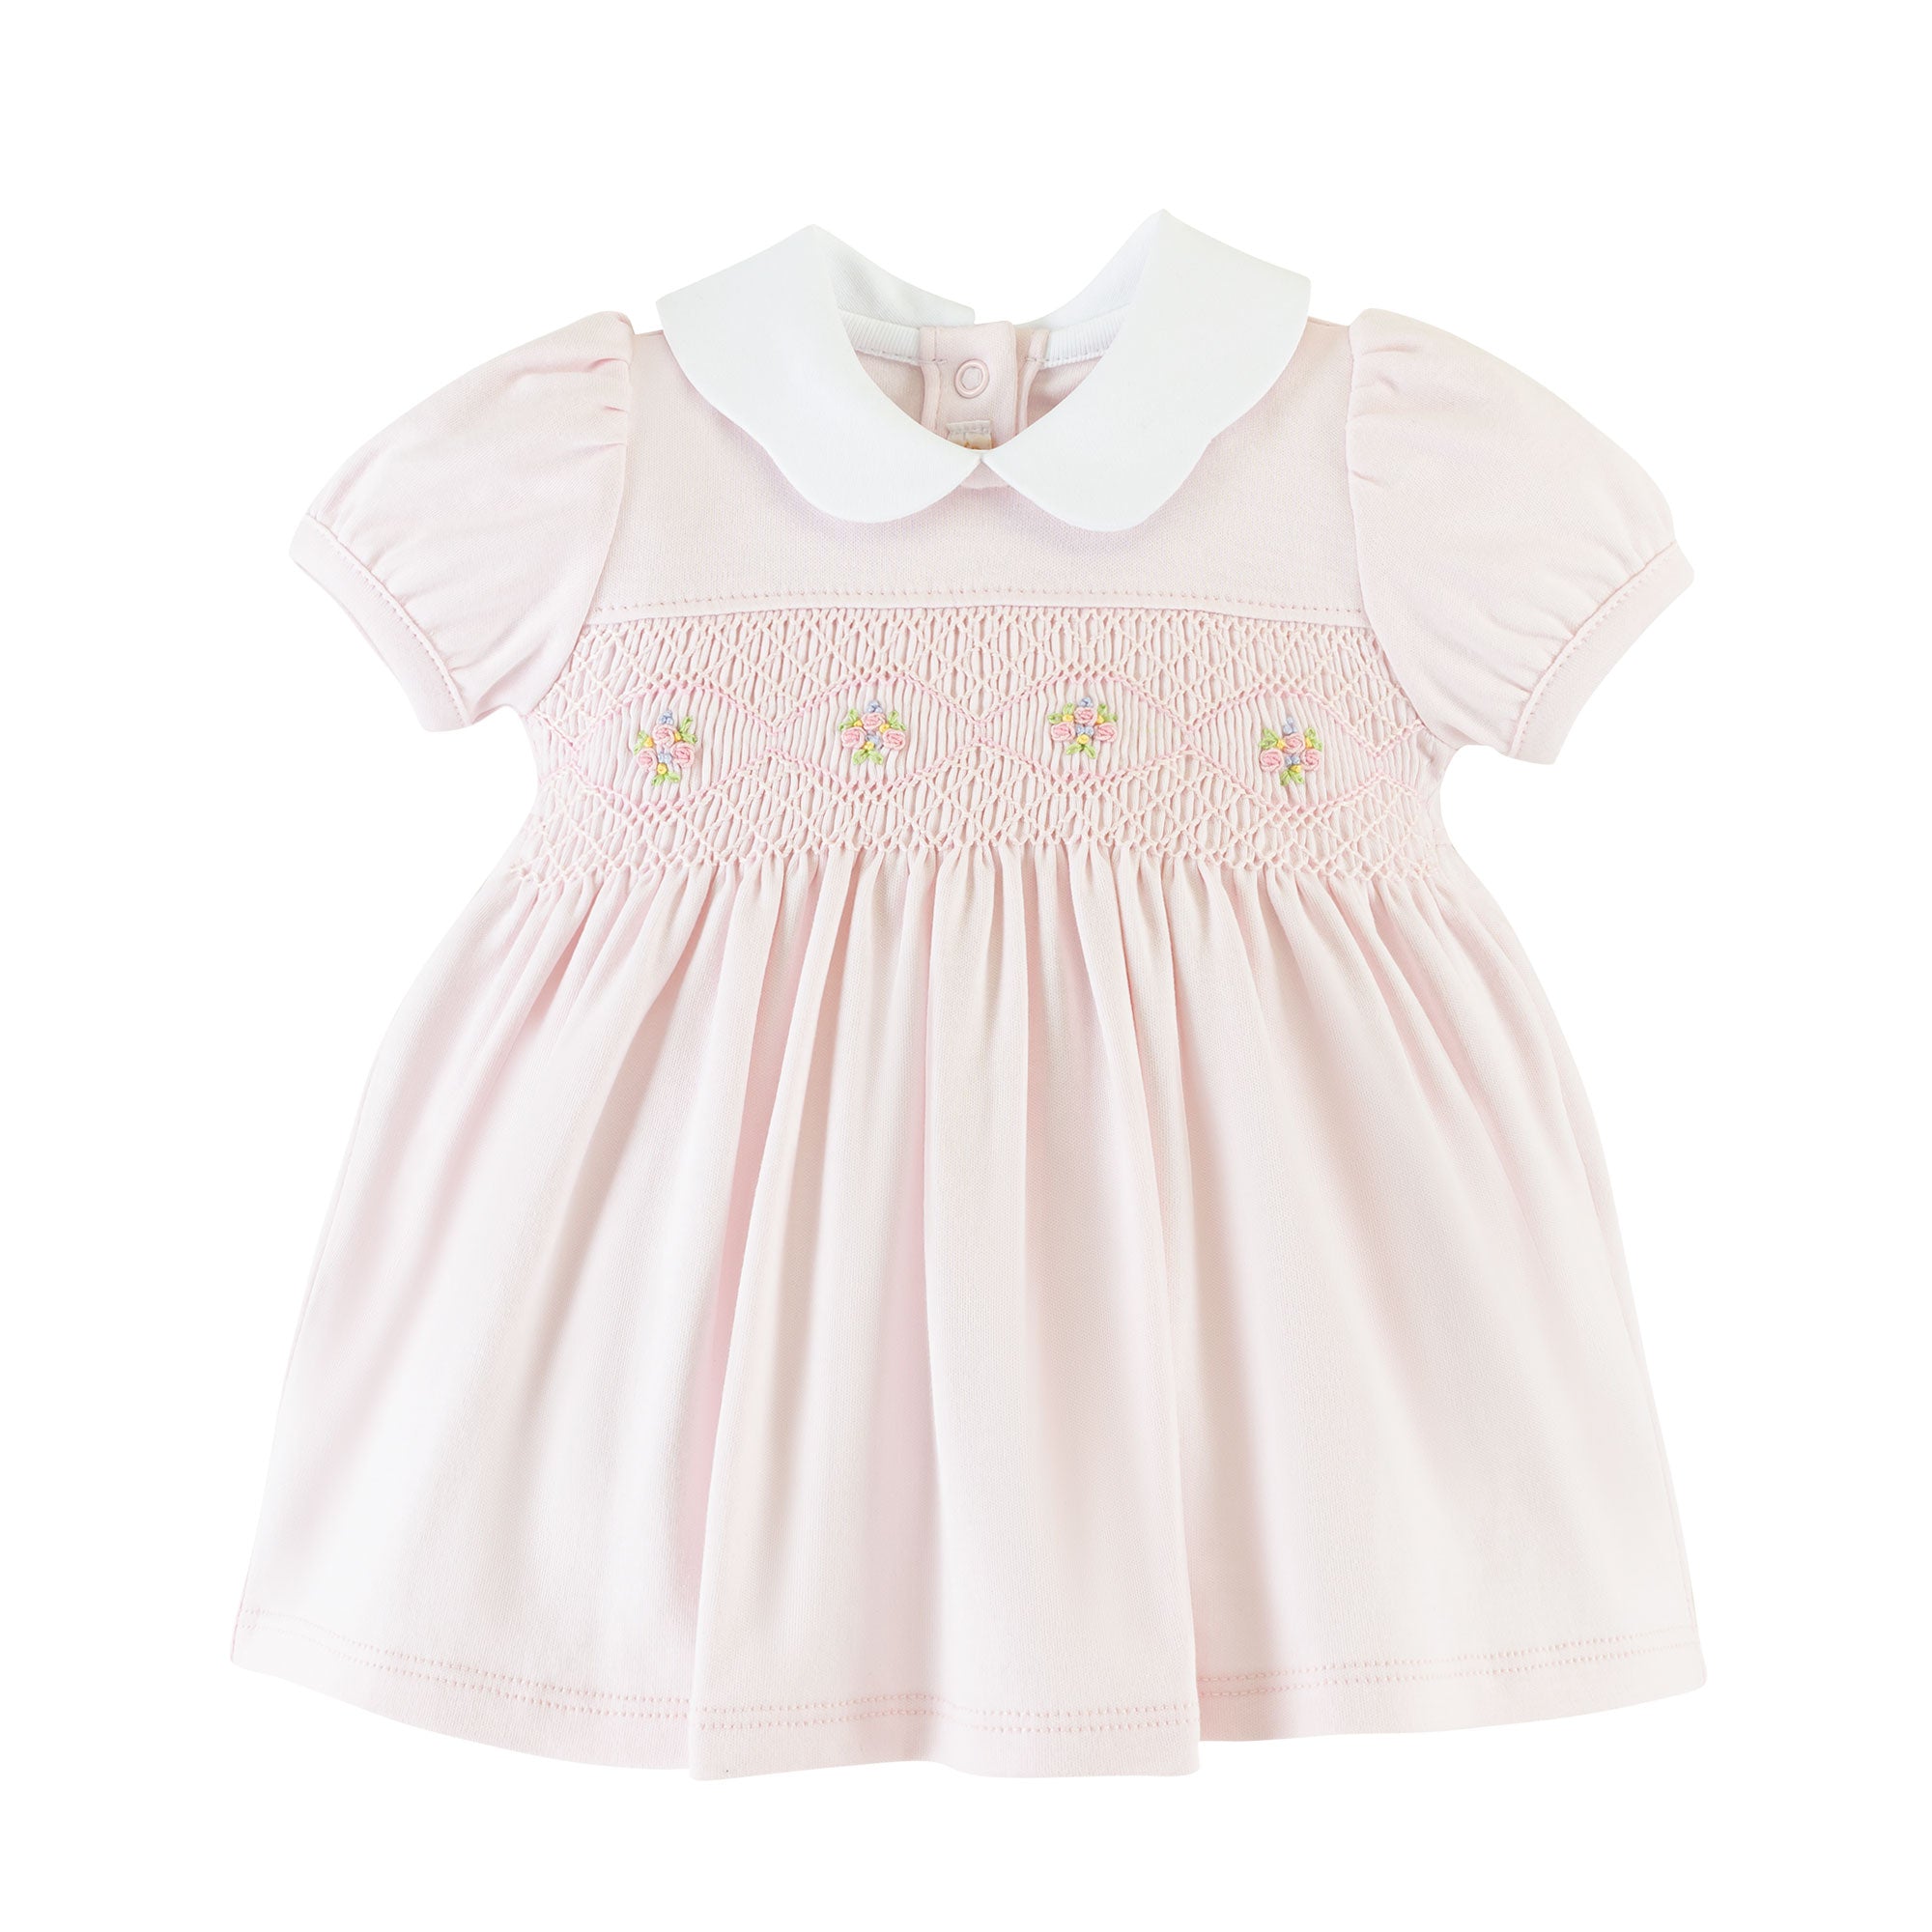 Hand-Smocked Dress Set With Round Collar, Pink